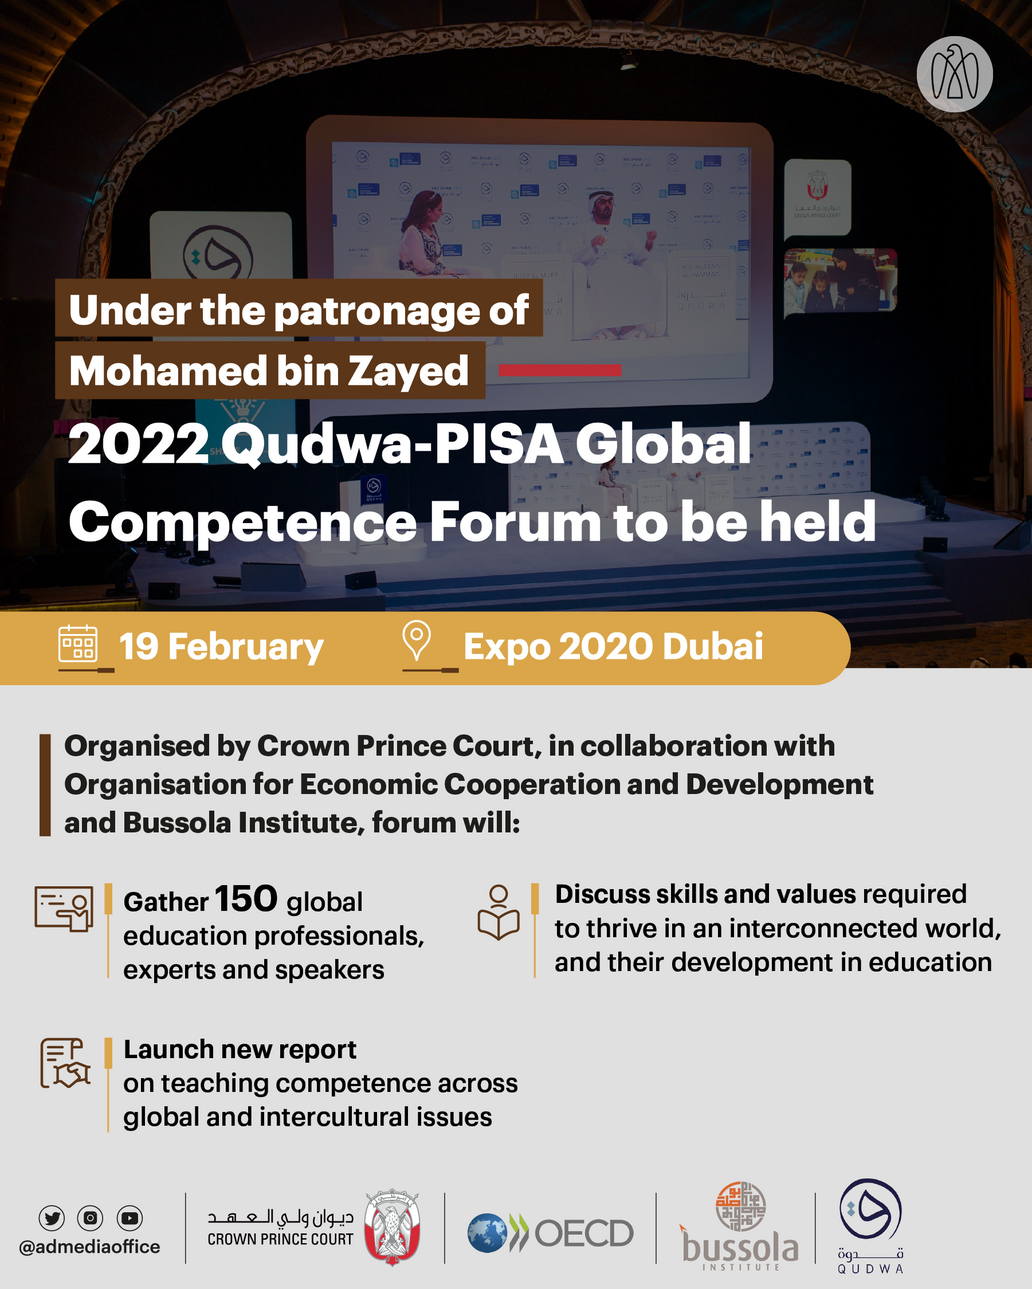 2022 Qudwa-PISA Global Competence Forum to be held